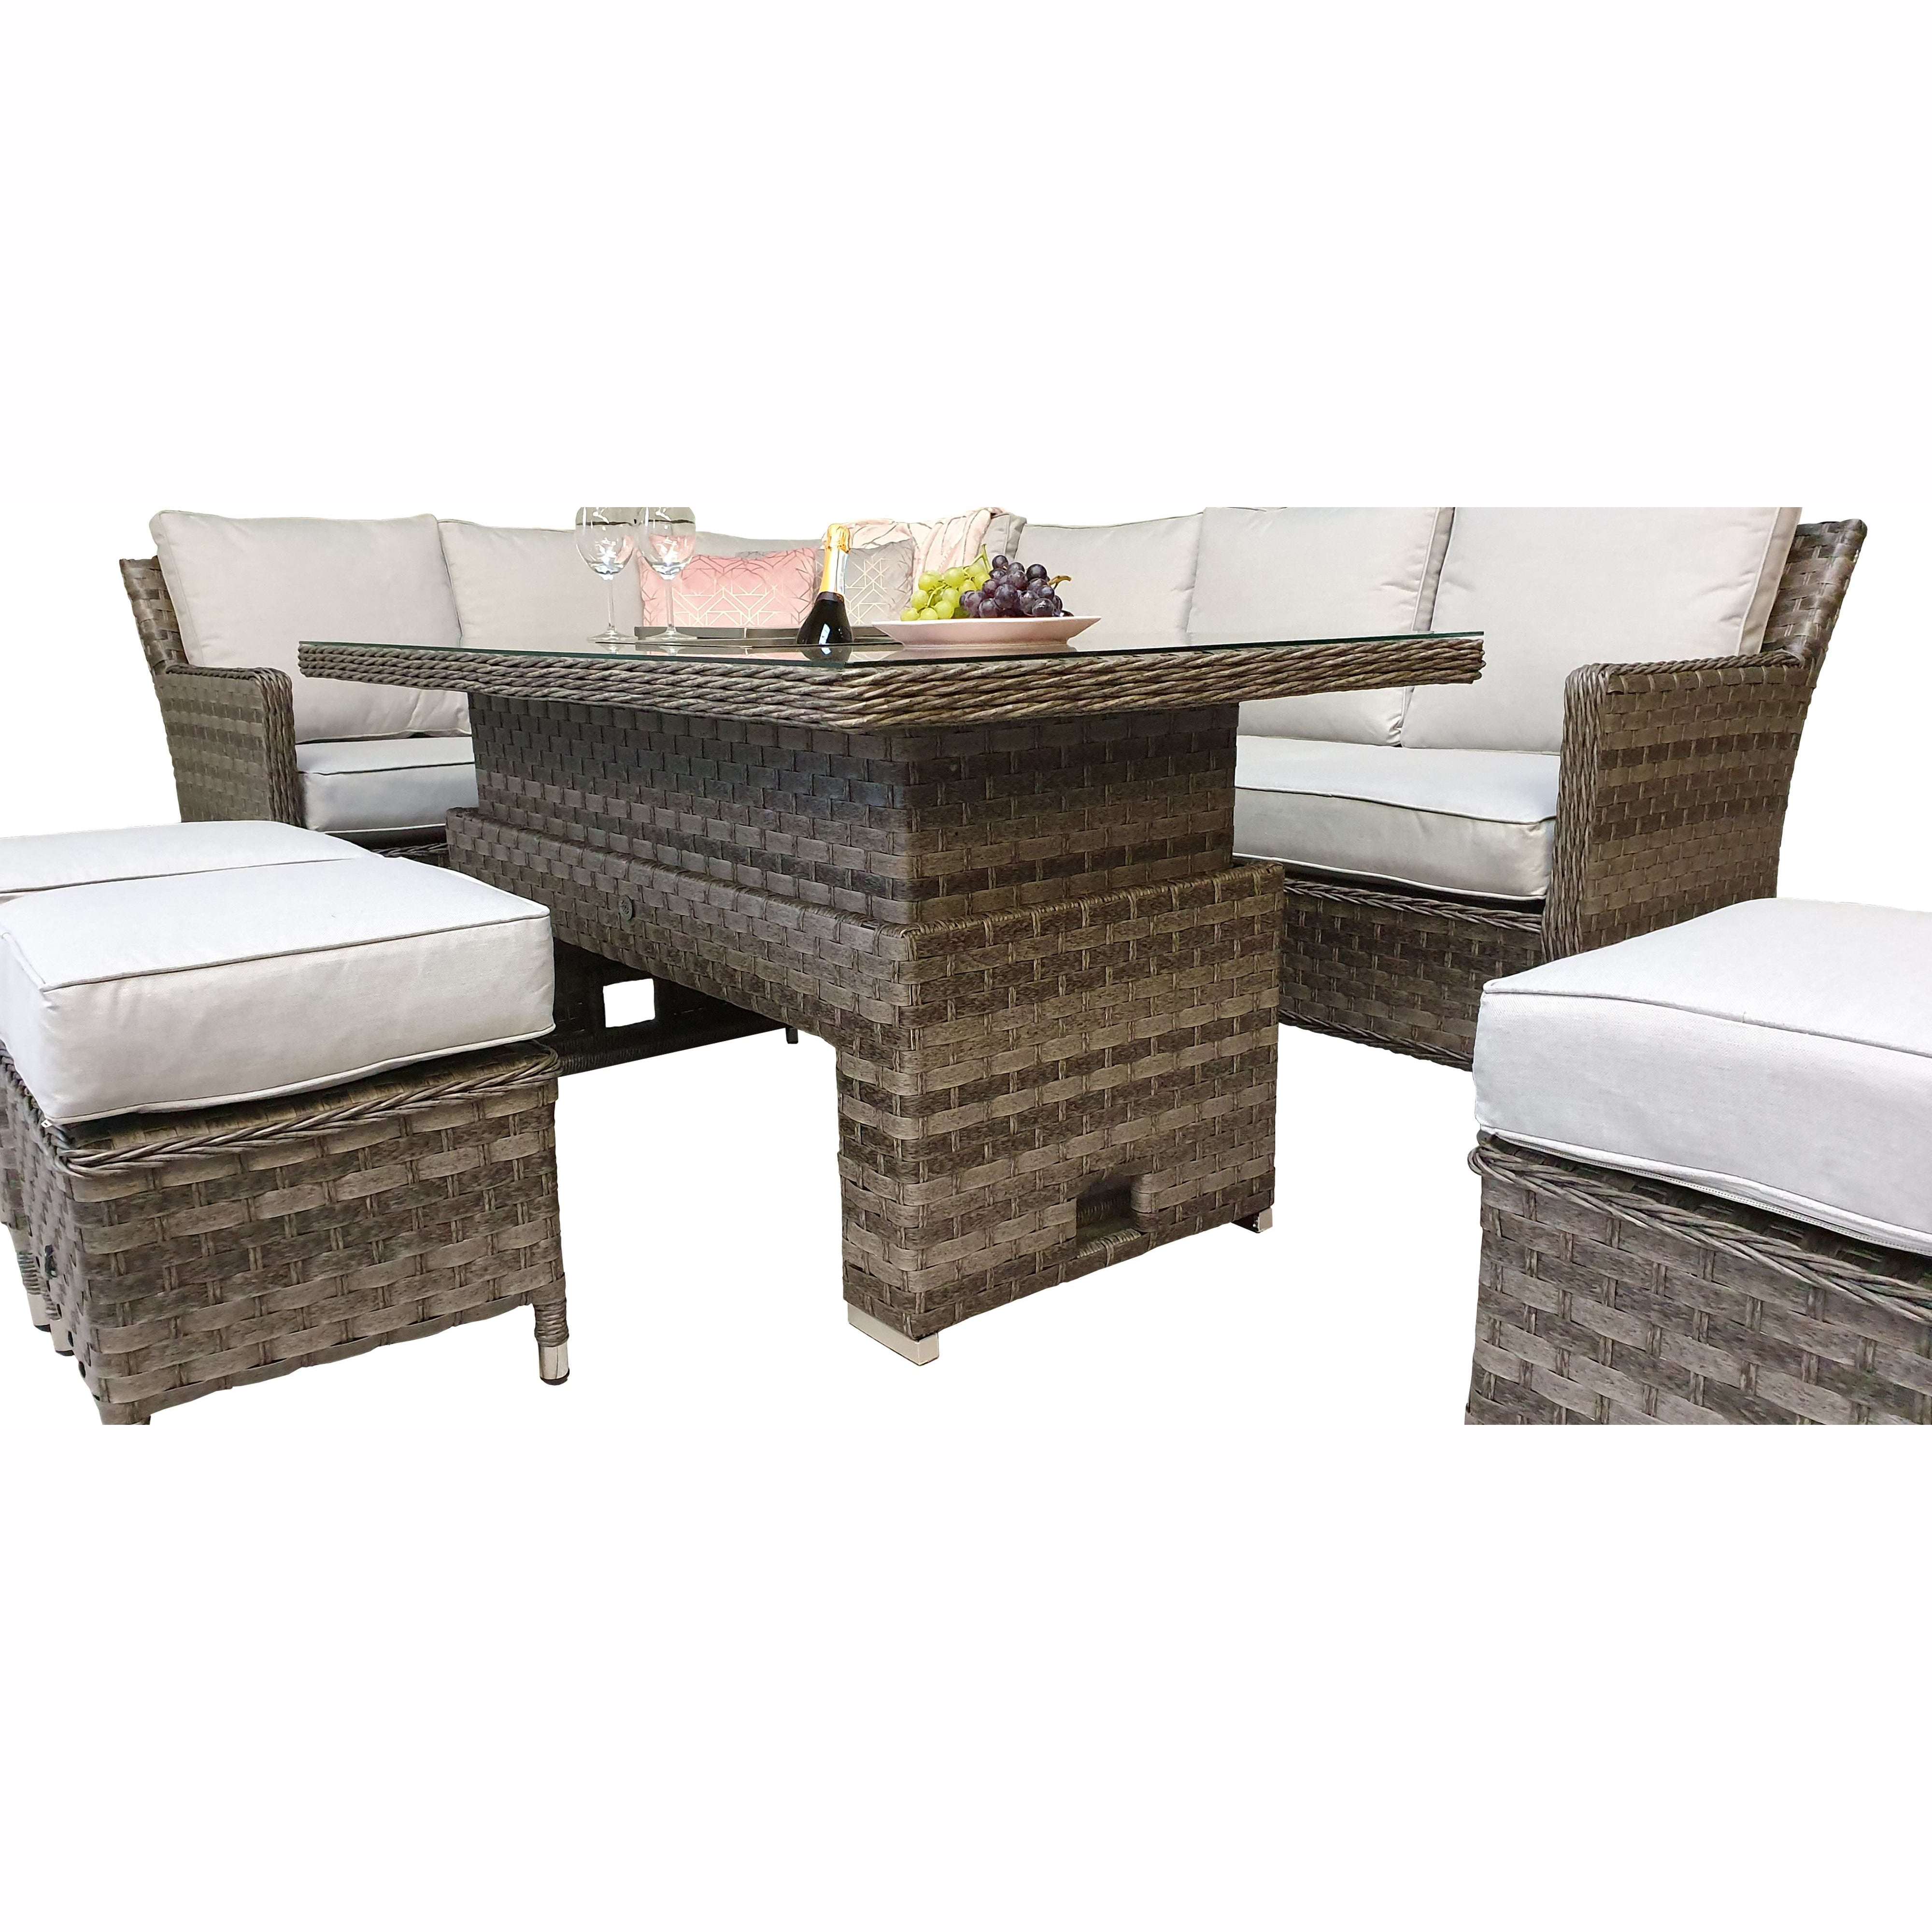 Exceptional Garden:Signature Weave Edwina Corner Dining Set with Lift Table and Ice bucket- Multi Wicker Grey